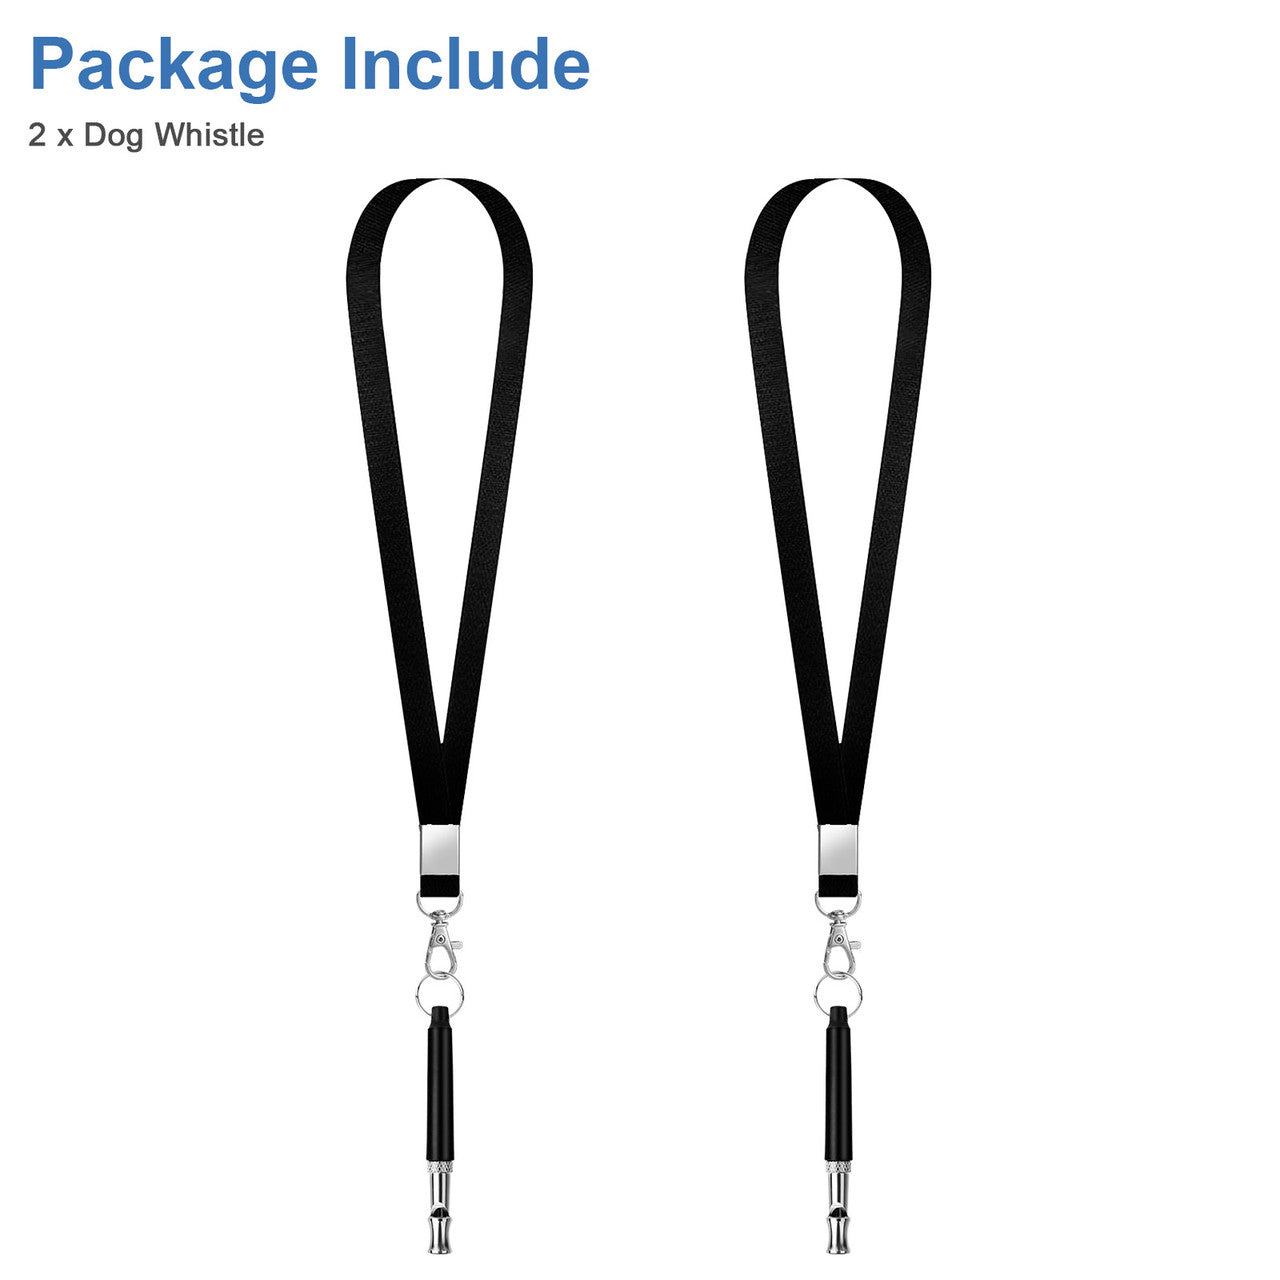 2 Pack Dog Whistle - Adjustable Ultrasonic Dog Whistle to Stop Barking Neighbors; Professional Silent Dog Whistles to Stop Barking Training Tool for Dogs, with Black Strap Lanyard